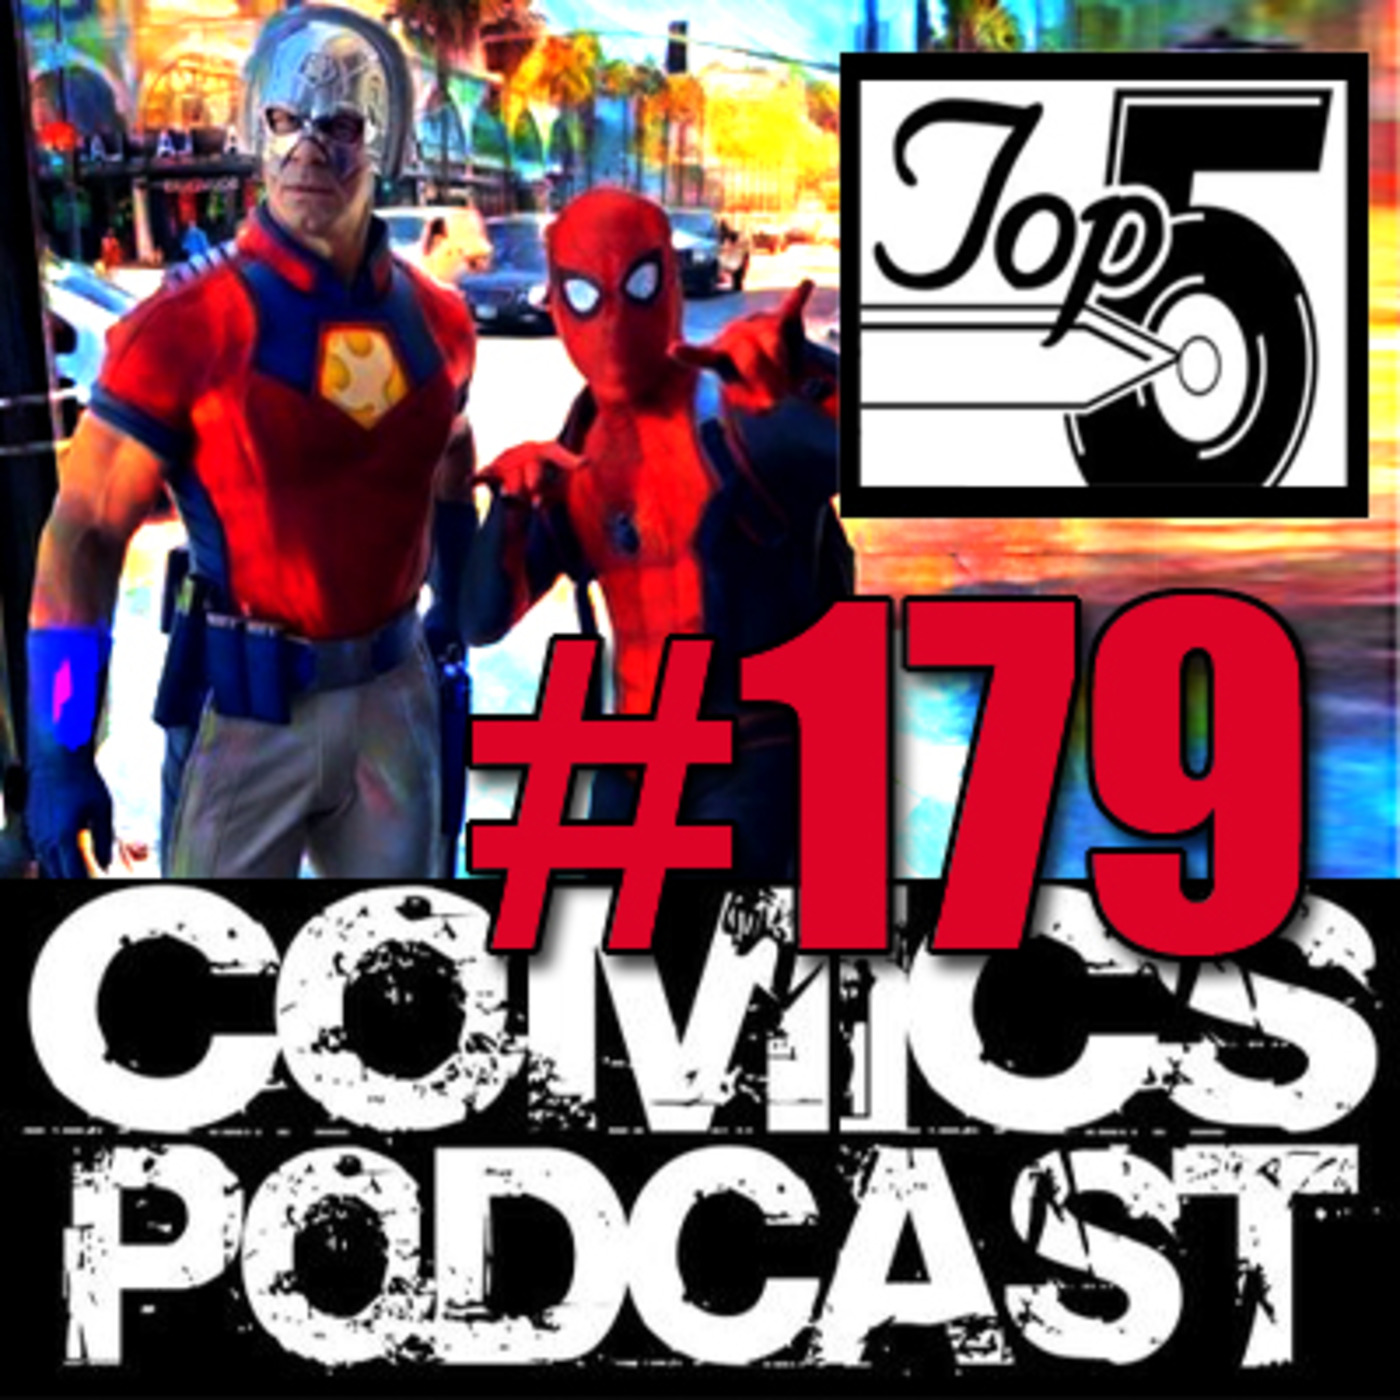 Episode 179: Top 5 Comics Podcast - Episode 179 - Spider-Man, Peacemaker and interview @ Rhode Island Comic Con